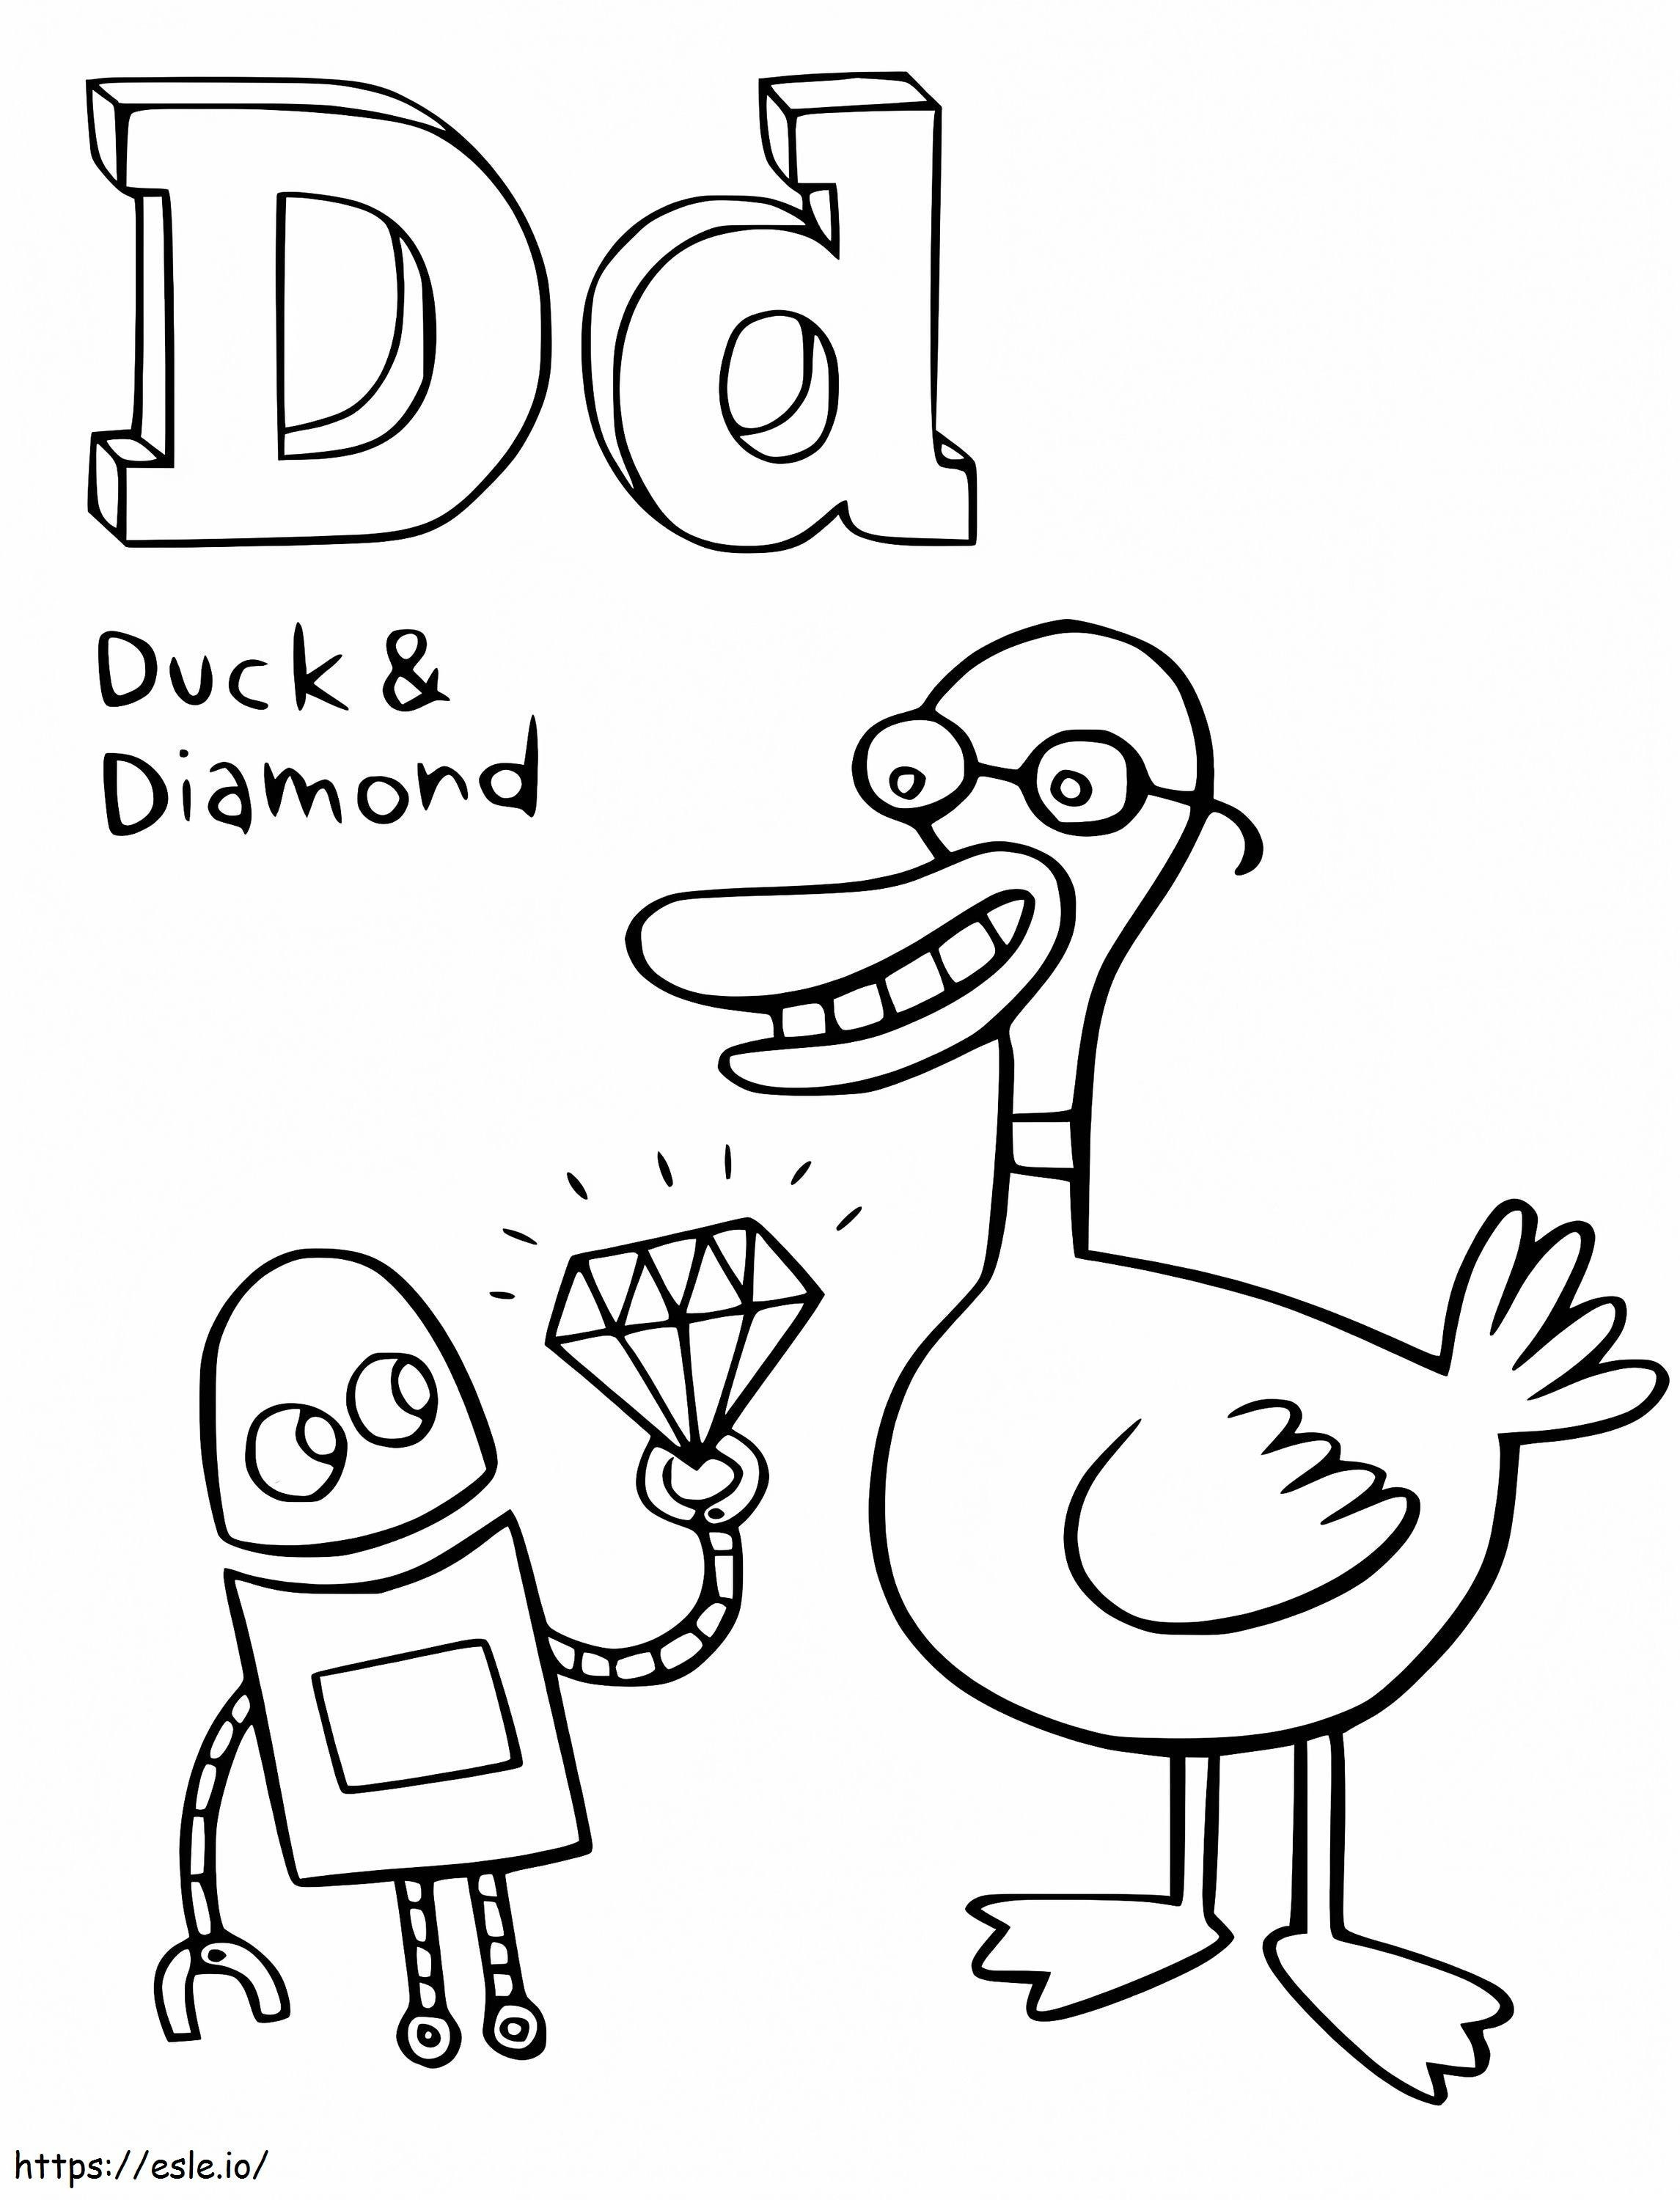 StoryBots Letter D coloring page